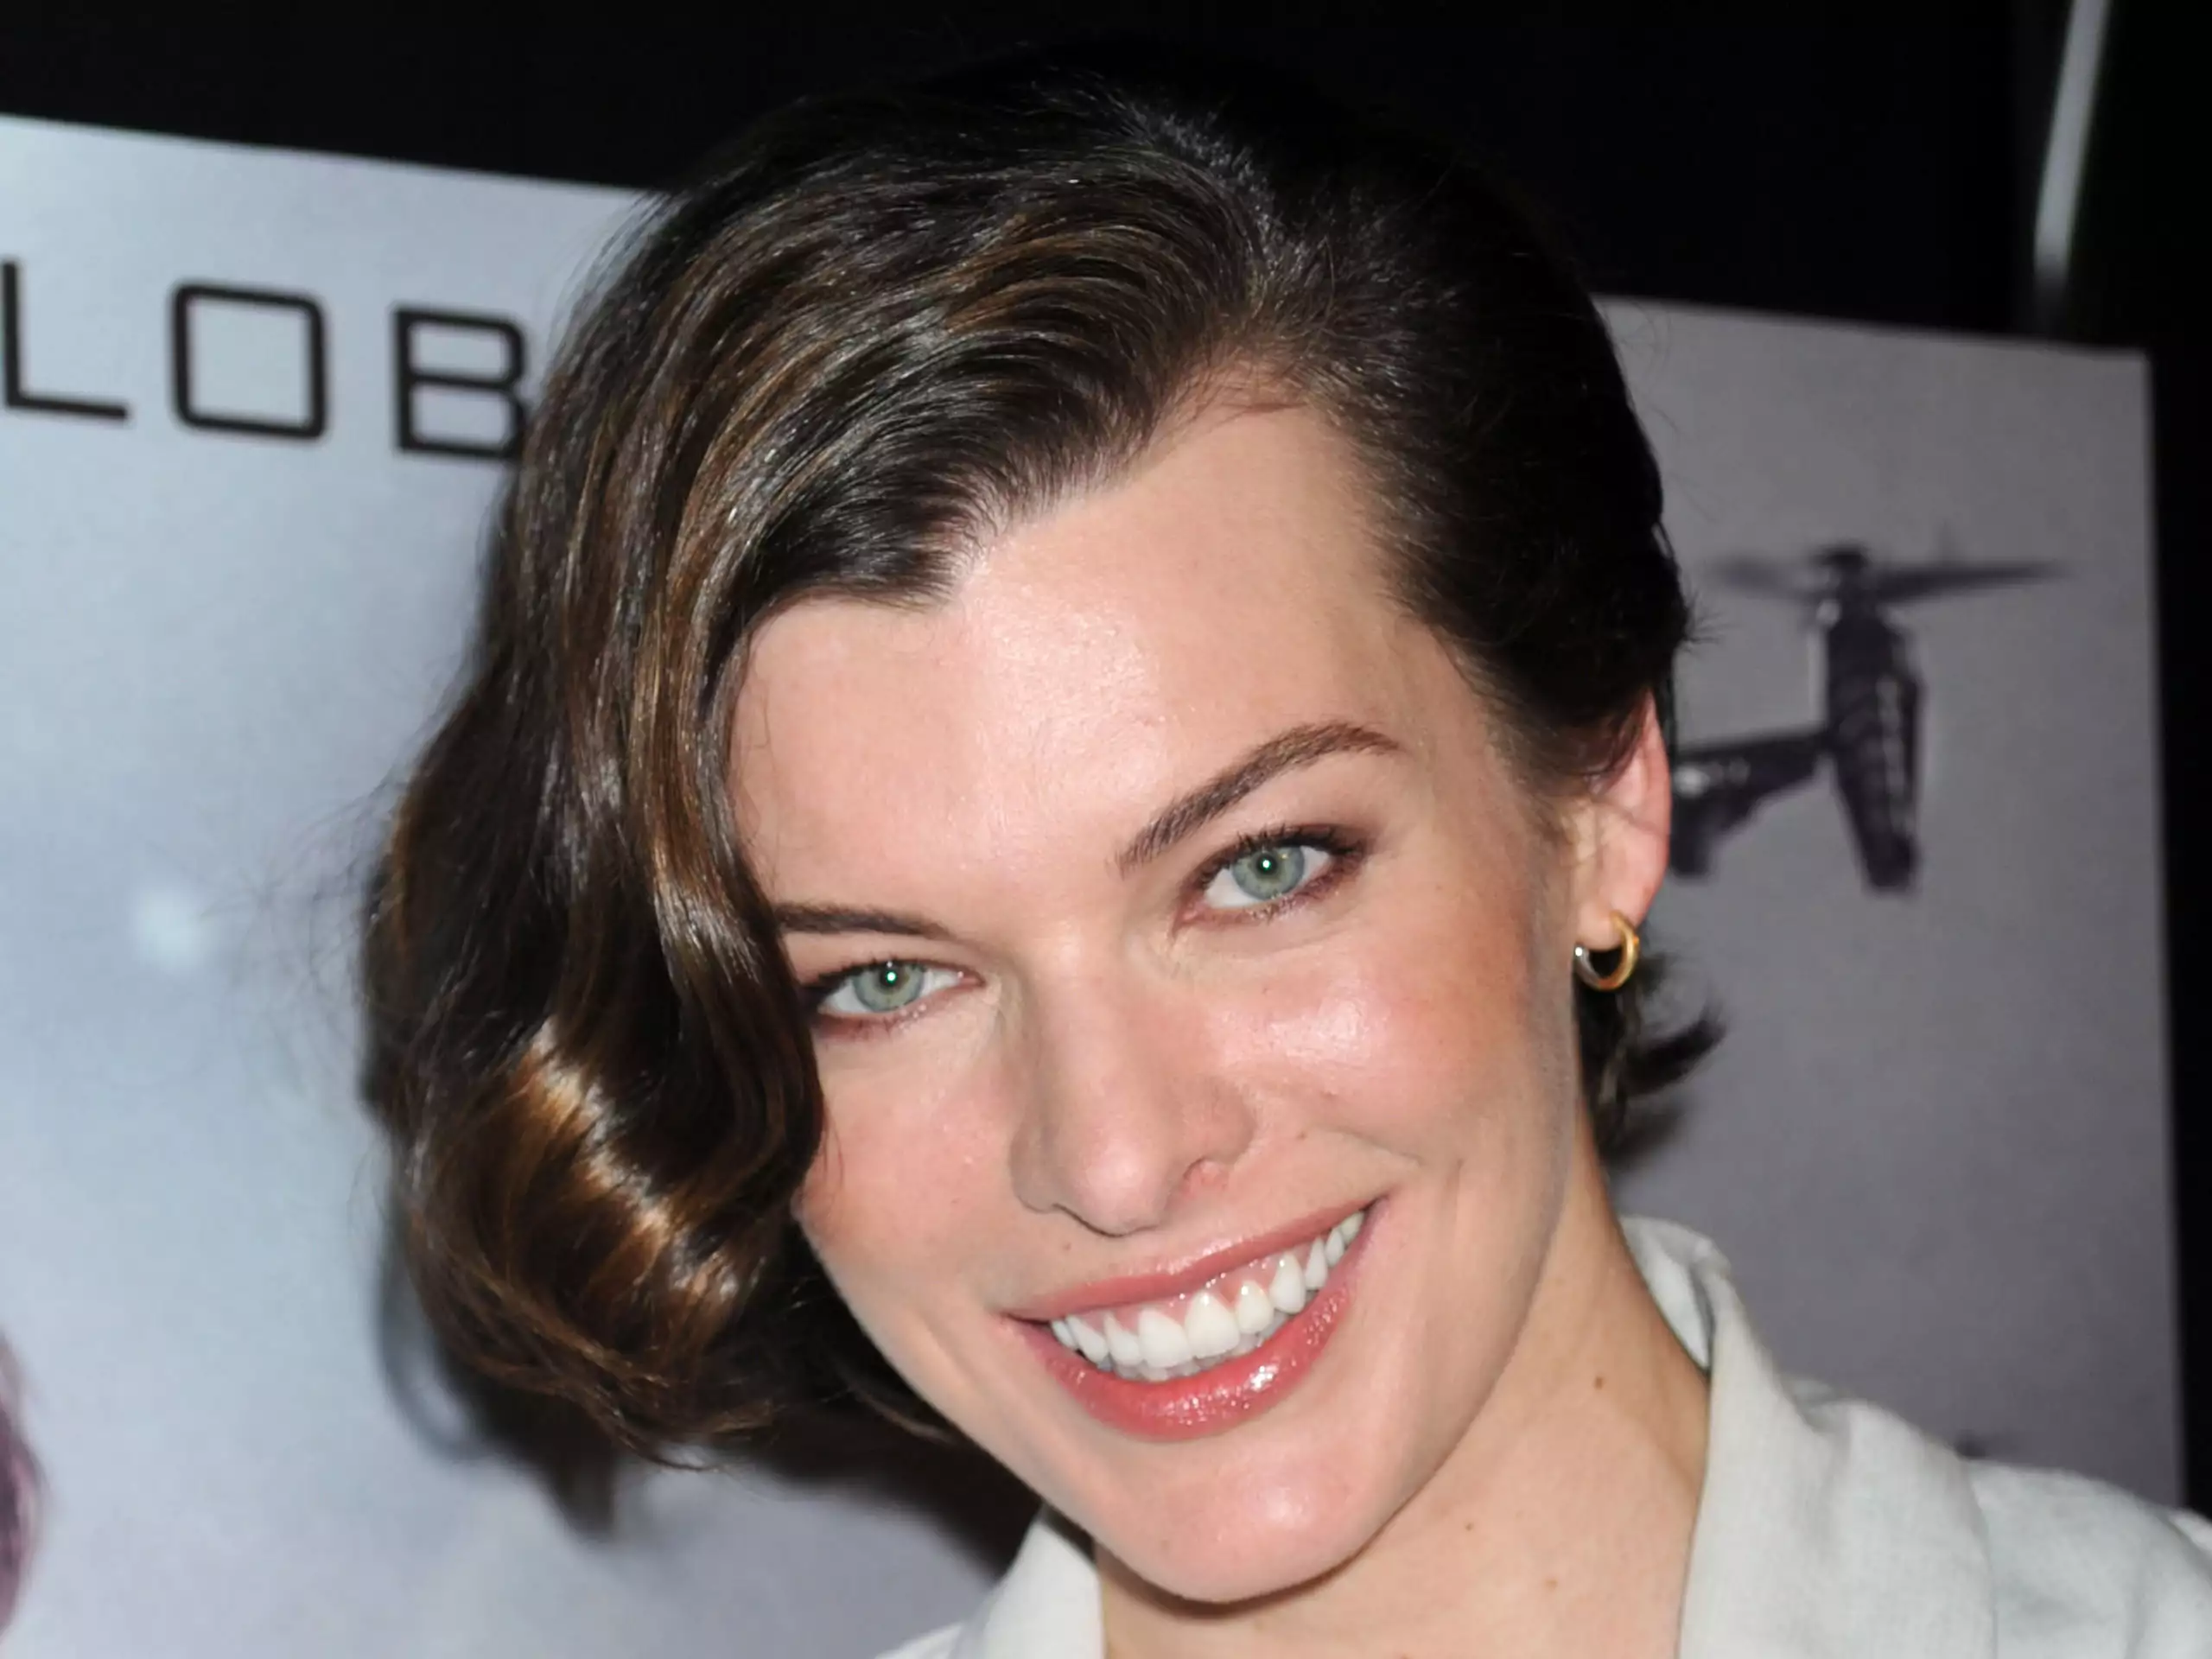 Milla Jovovich At Resident Evil Retribution In 3D In NYC.